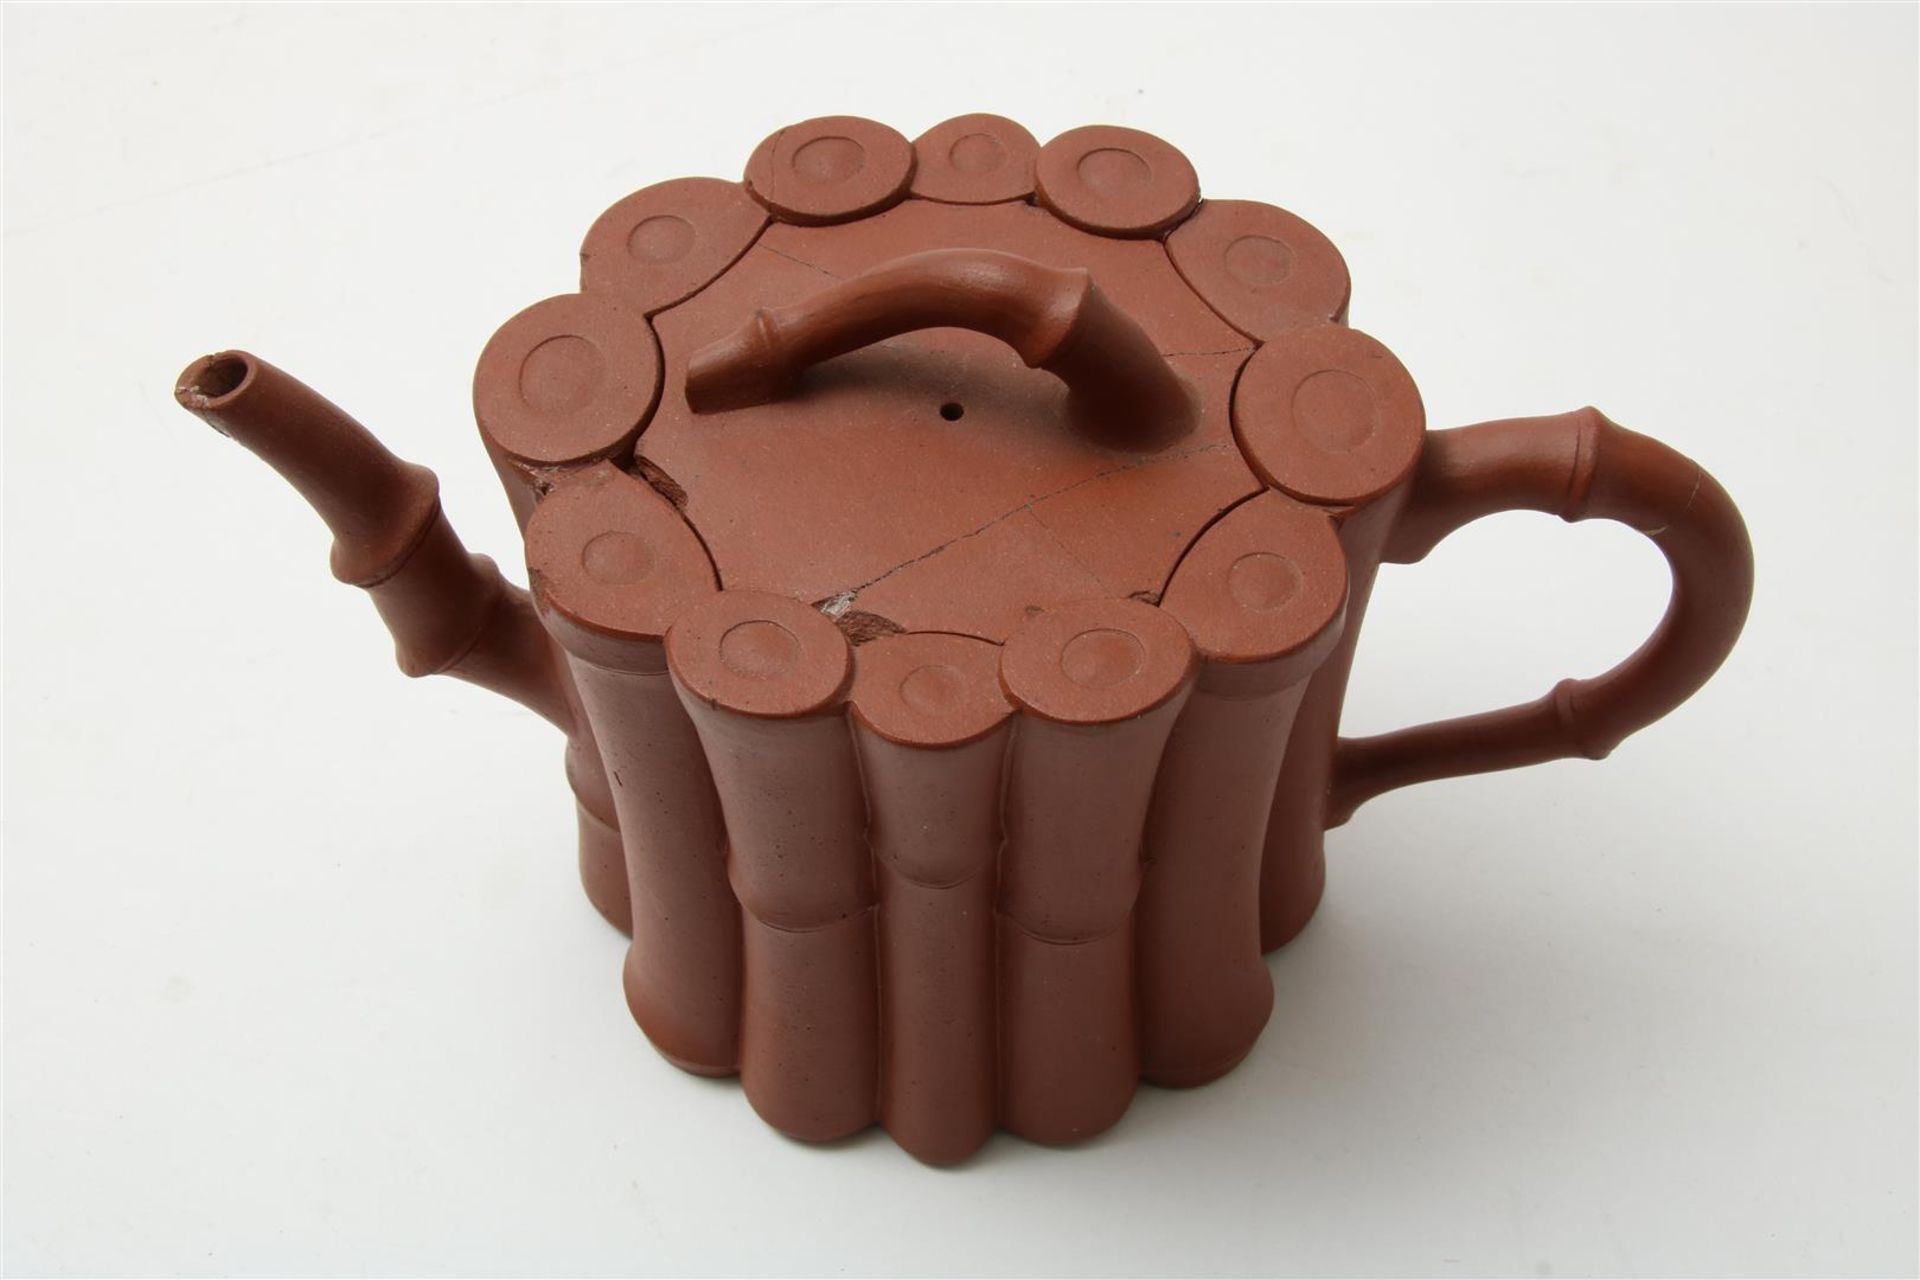 Yixing teapot, bamboo decor, China 18th/19th century, h. 14 cm. (cracked and glued) - Image 2 of 4